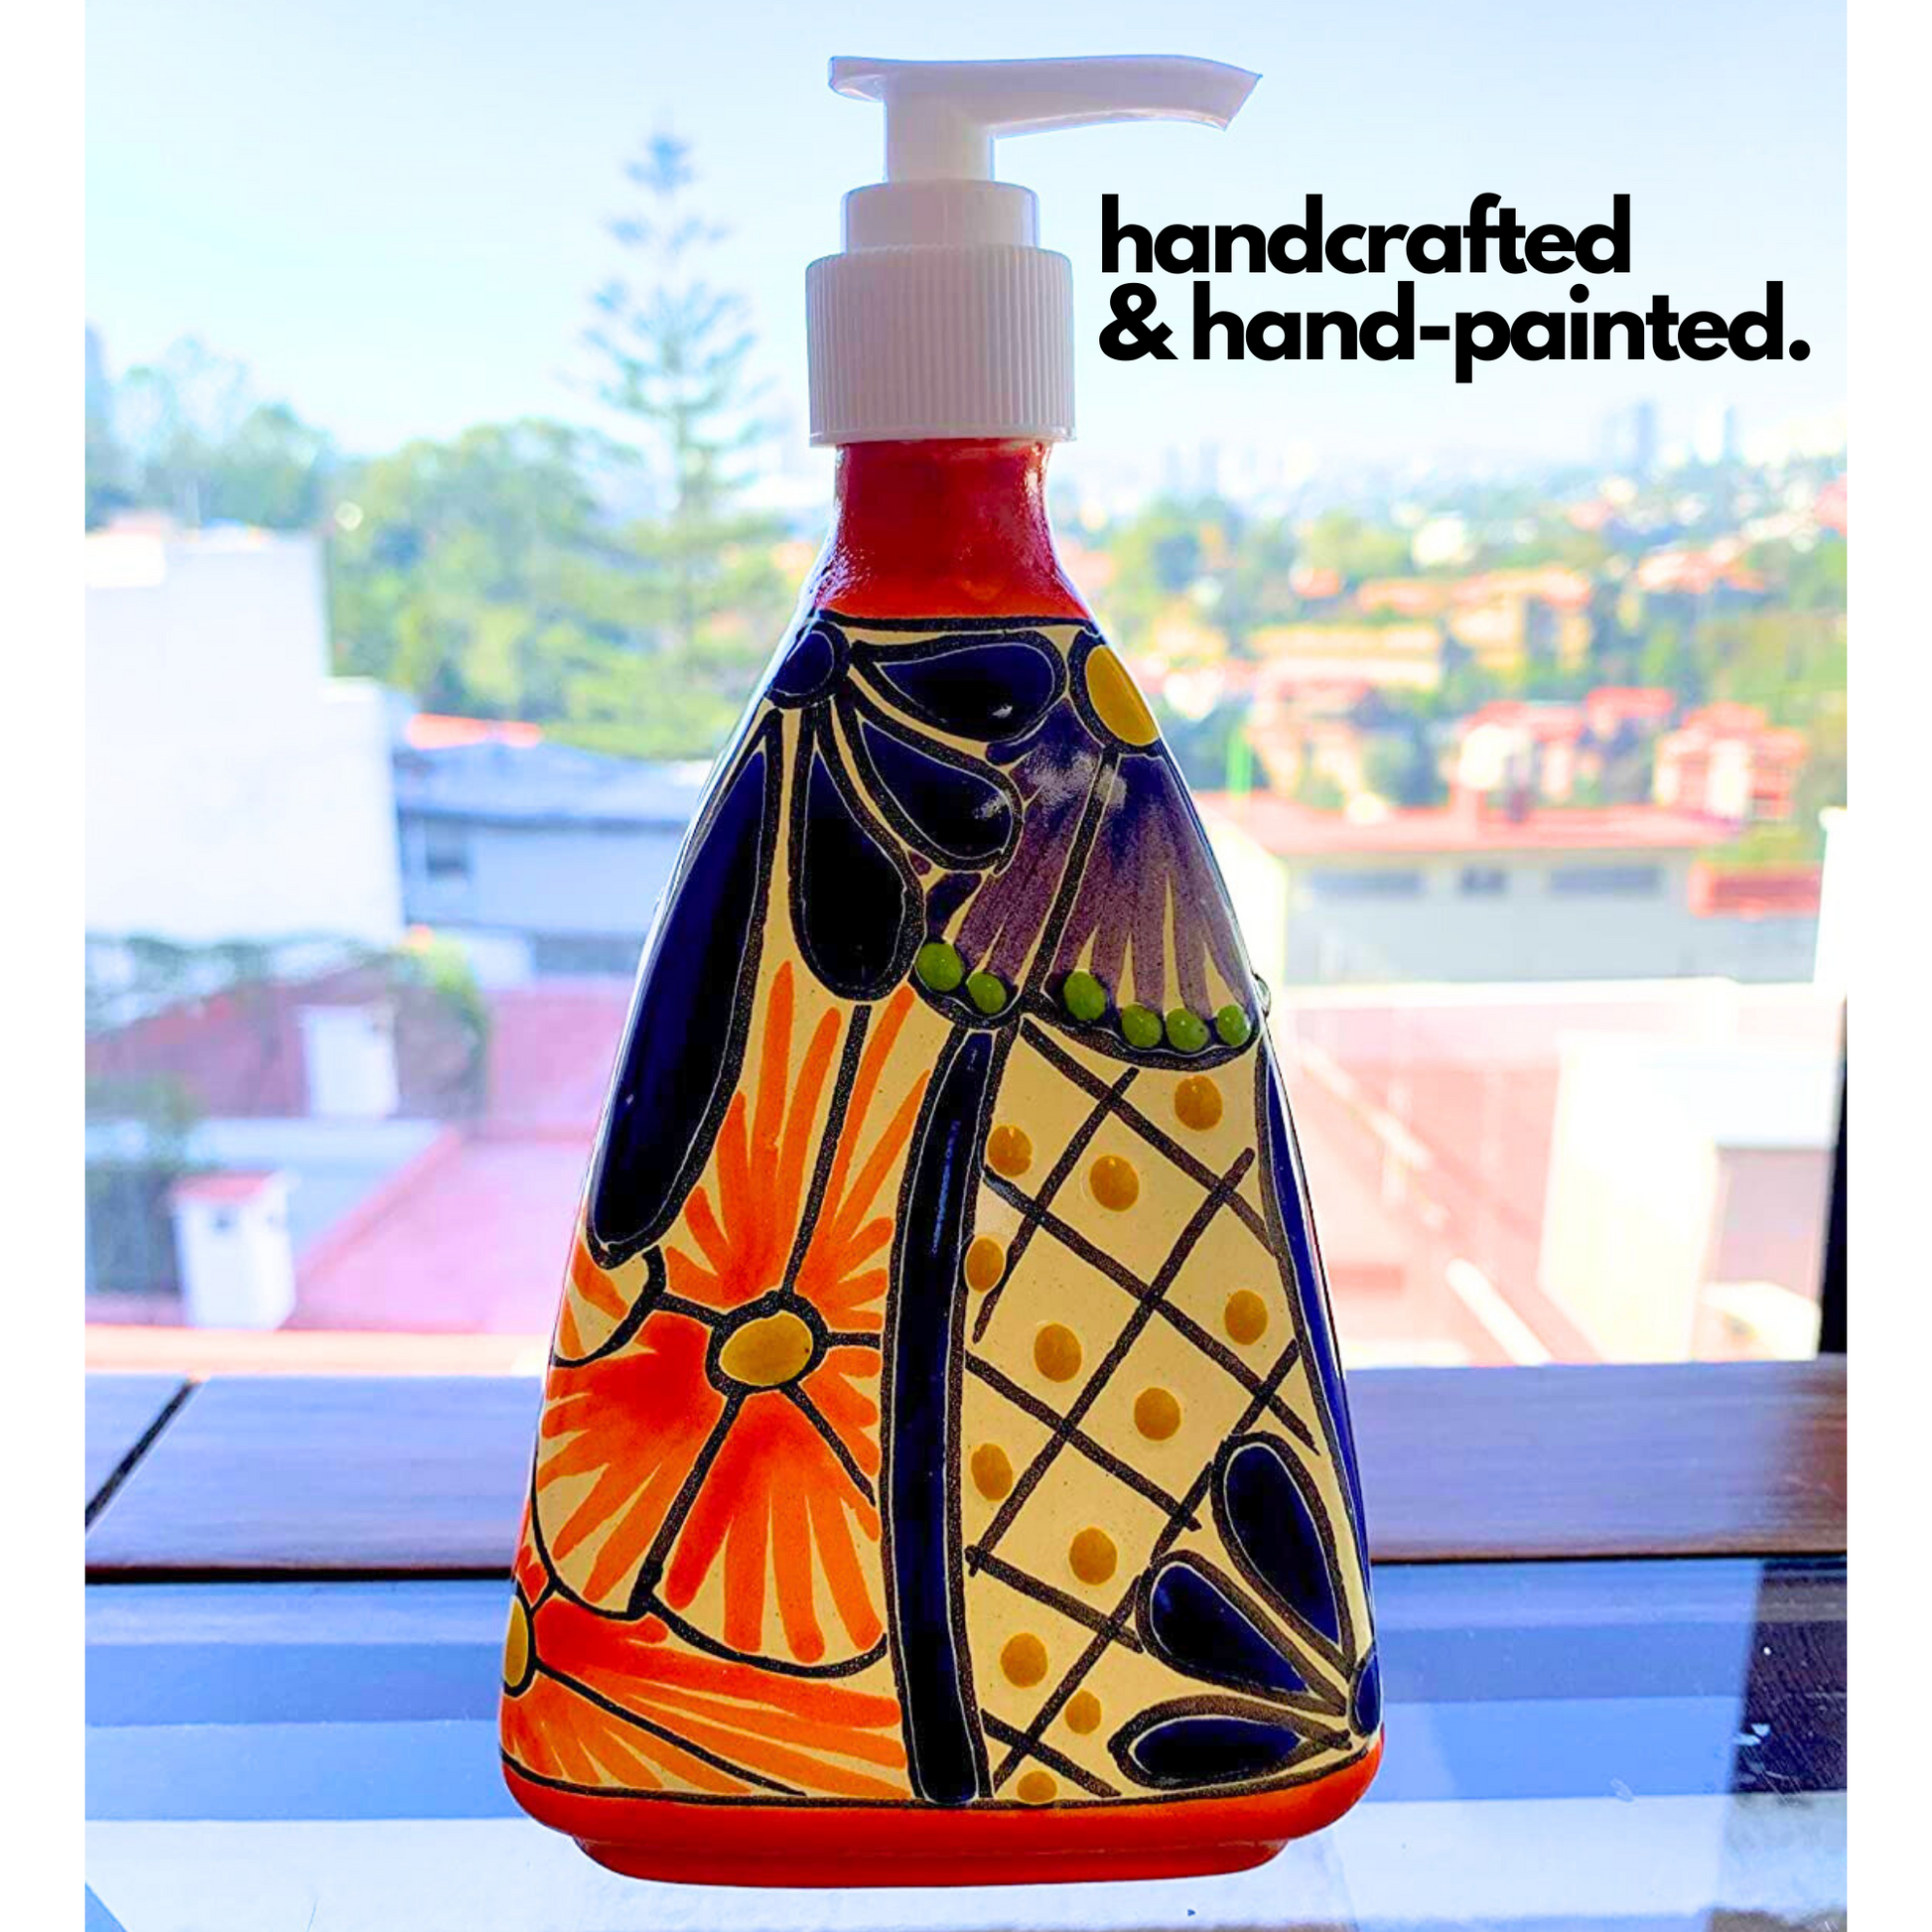 lifestyle photo of Pyramid-shaped Ceramic Soap Dispenser, hand-painted by Mexican artisans, perfect for adding a vibrant touch to kitchen or bathroom decor.